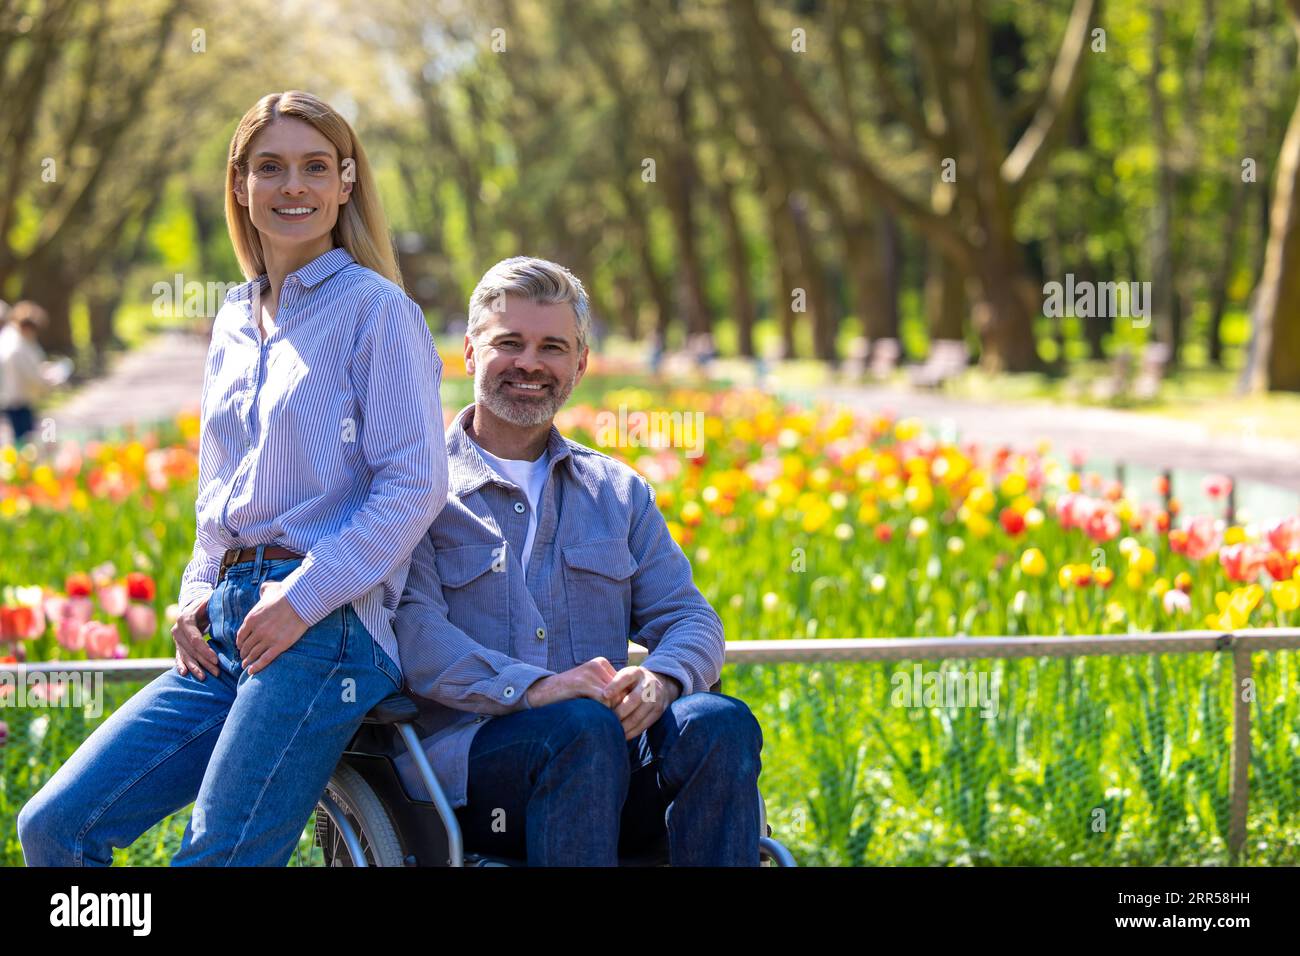 Woman and disabled man in wheelchair walking in park, romantic walking. Stock Photo